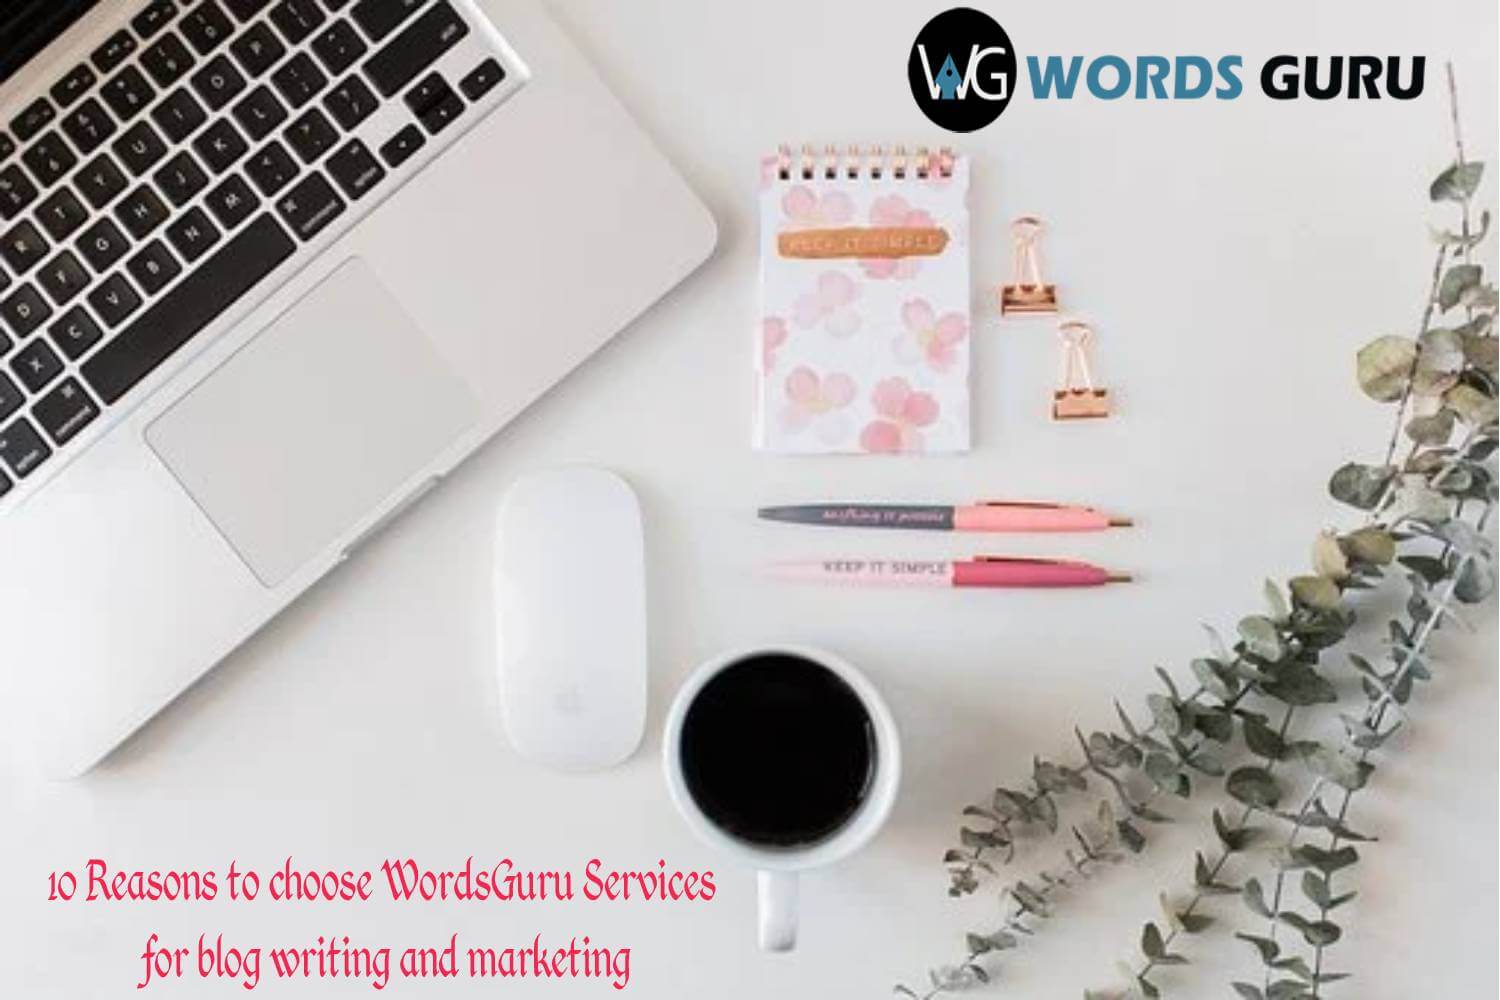 10 Reasons to choose WordsGuru Services for blog writing and marketing